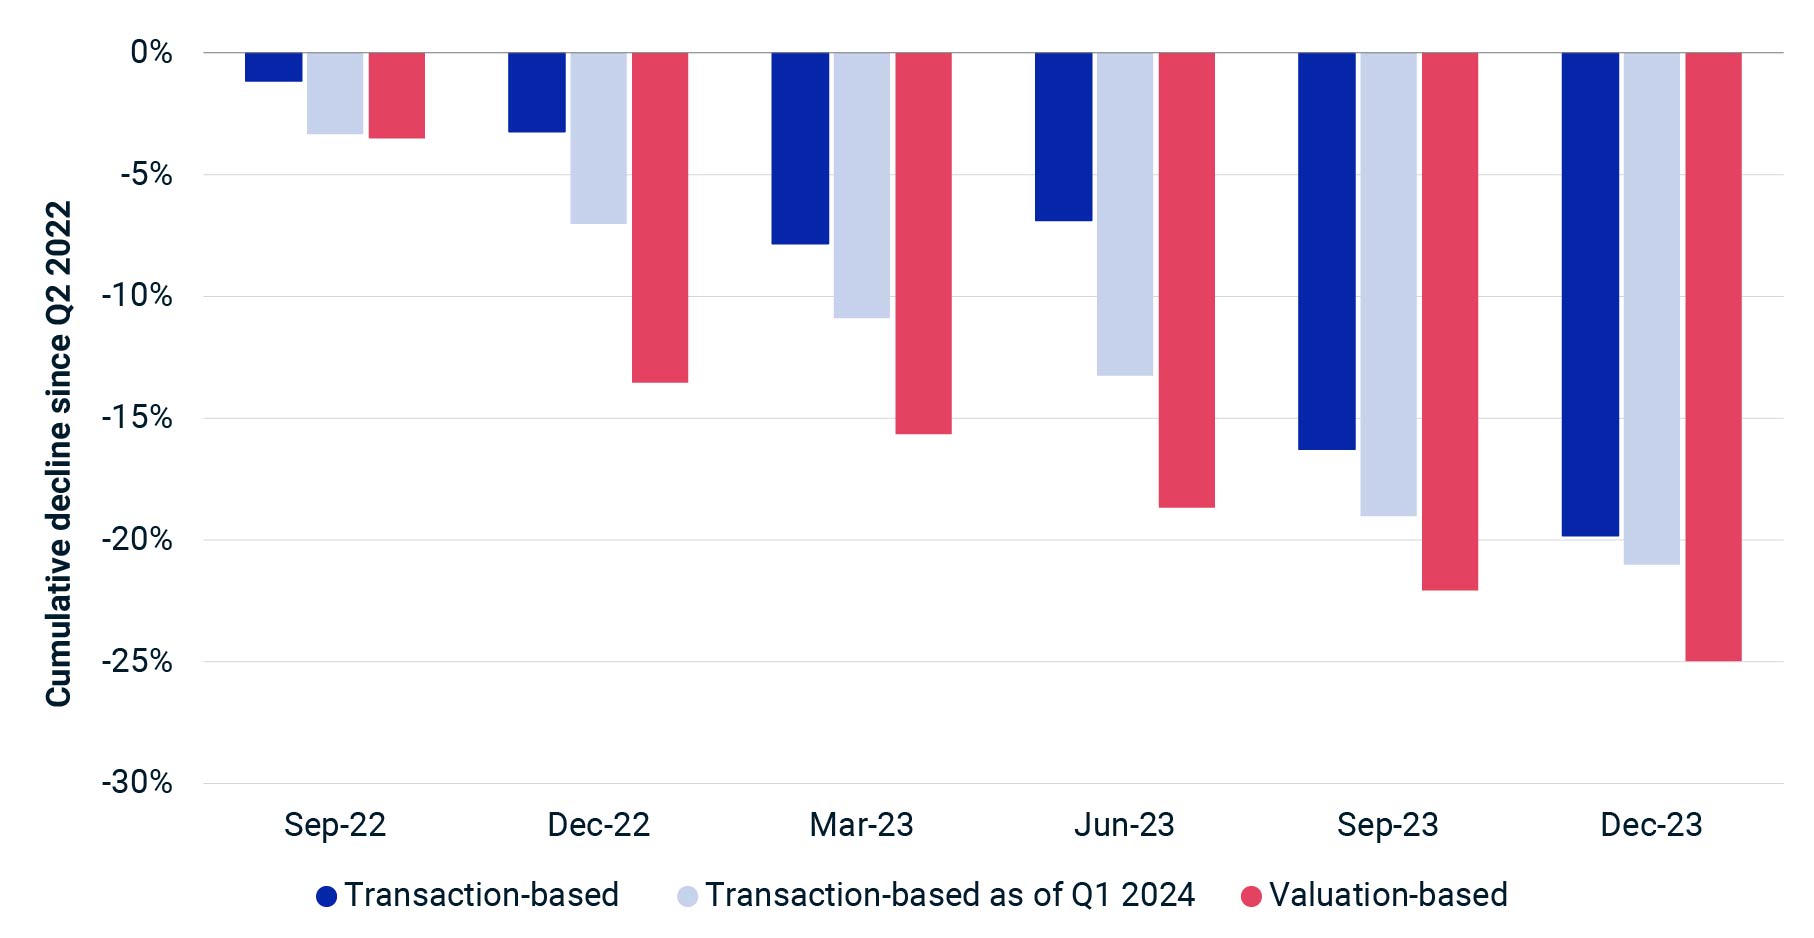 The chart shows the cumulative decline in U.K. office pricing since Q2 2022, with data points for September 2022, December 2022, March 2023, June 2023, September 2023, and December 2023. It compares three different types of index: transaction-based, transaction-based as of Q1 2024, and valuation-based. The percentages range from 0% to -30%, indicating the magnitude of the decline over the specified period.